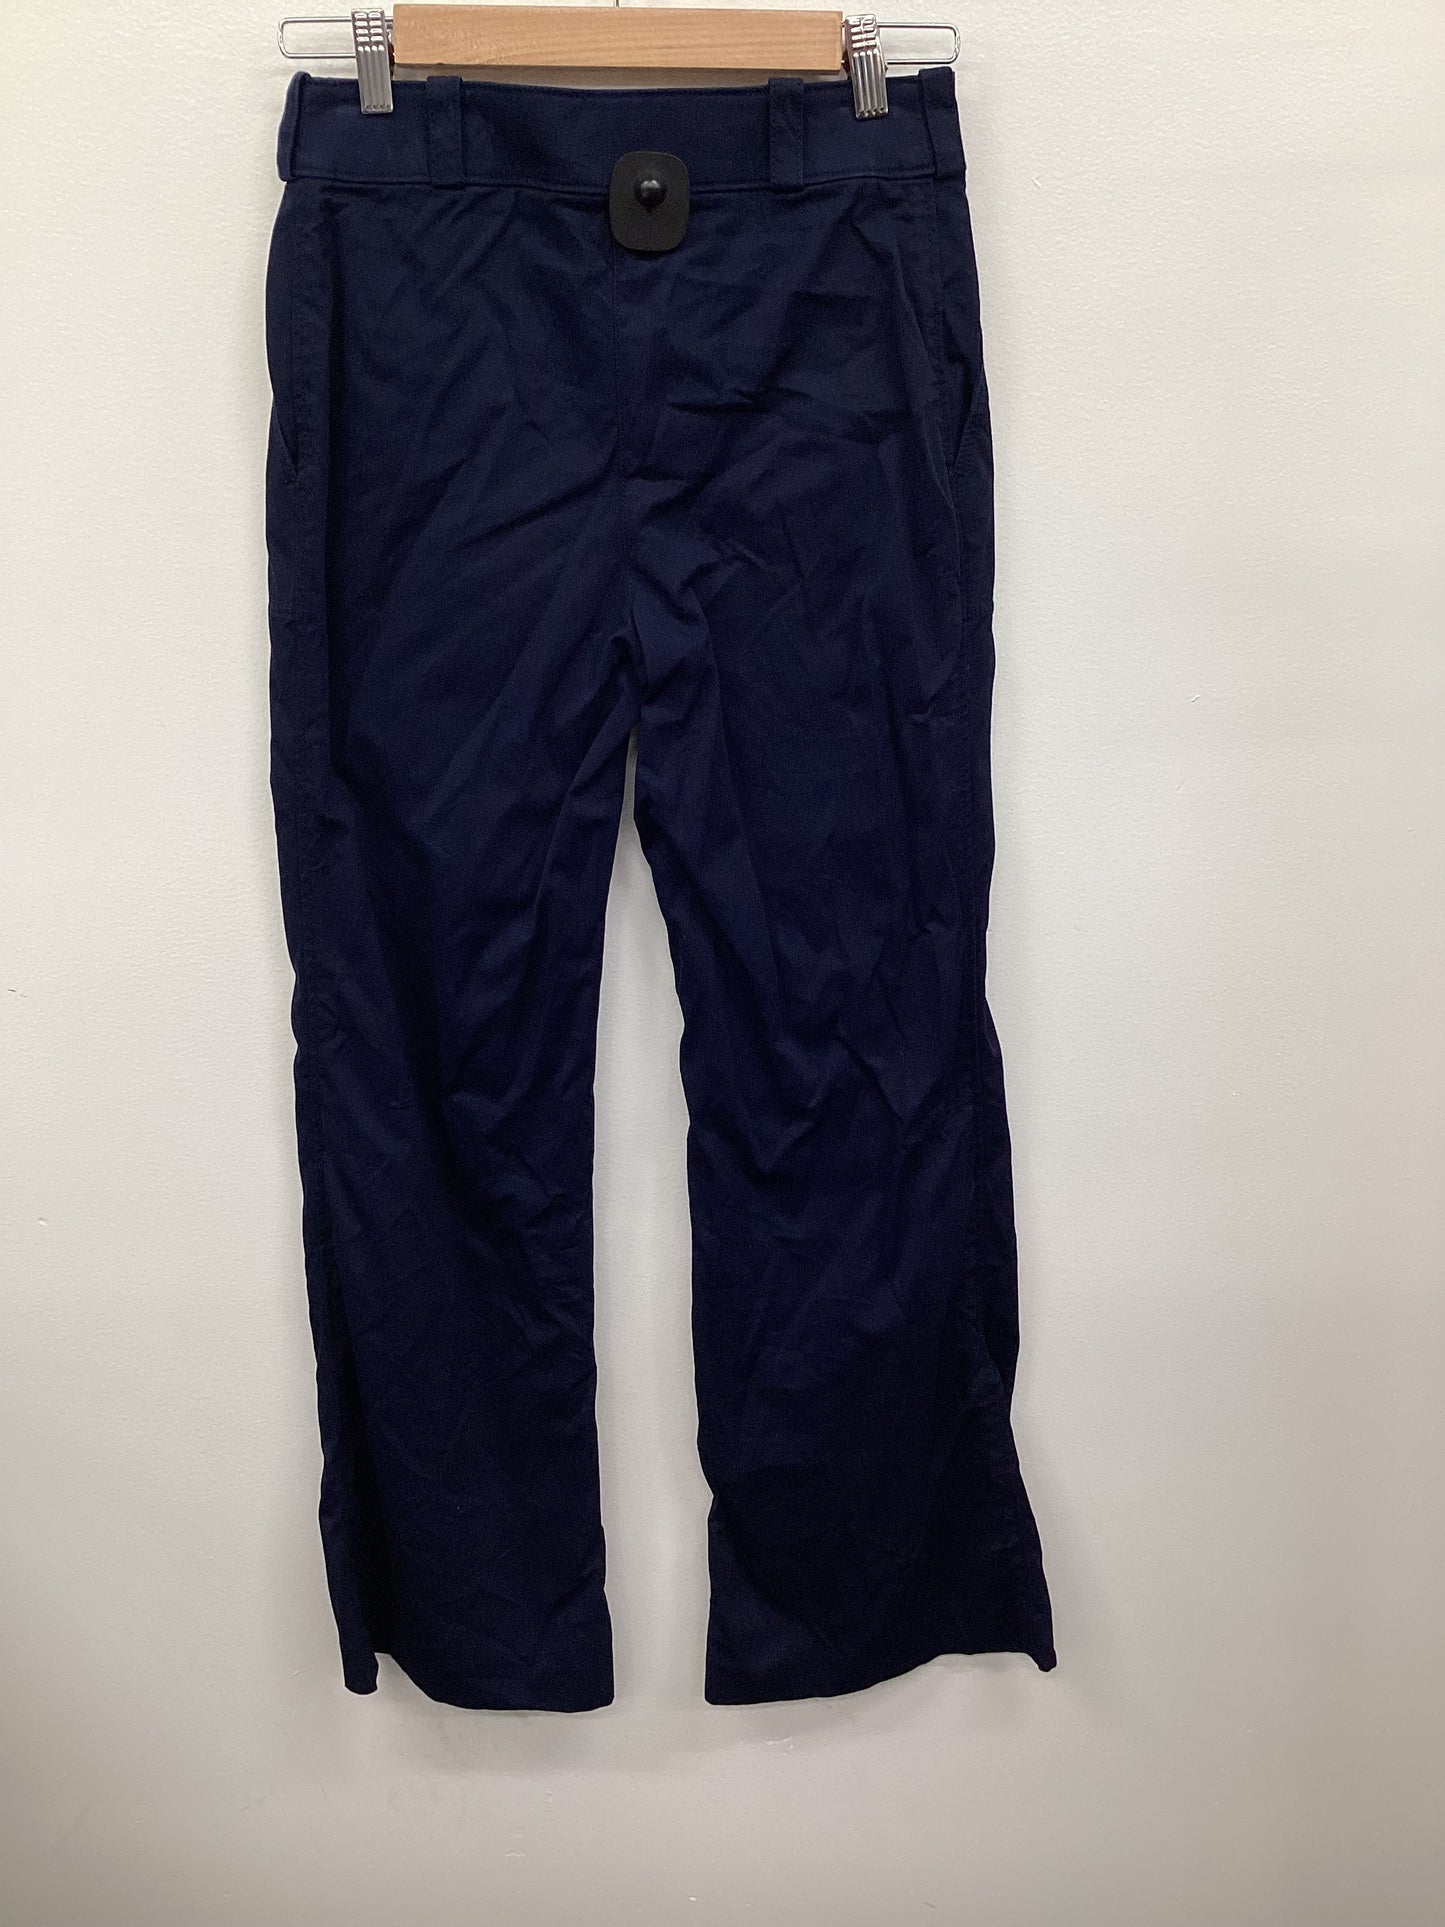 Pants Ankle By Tory Burch  Size: Xs